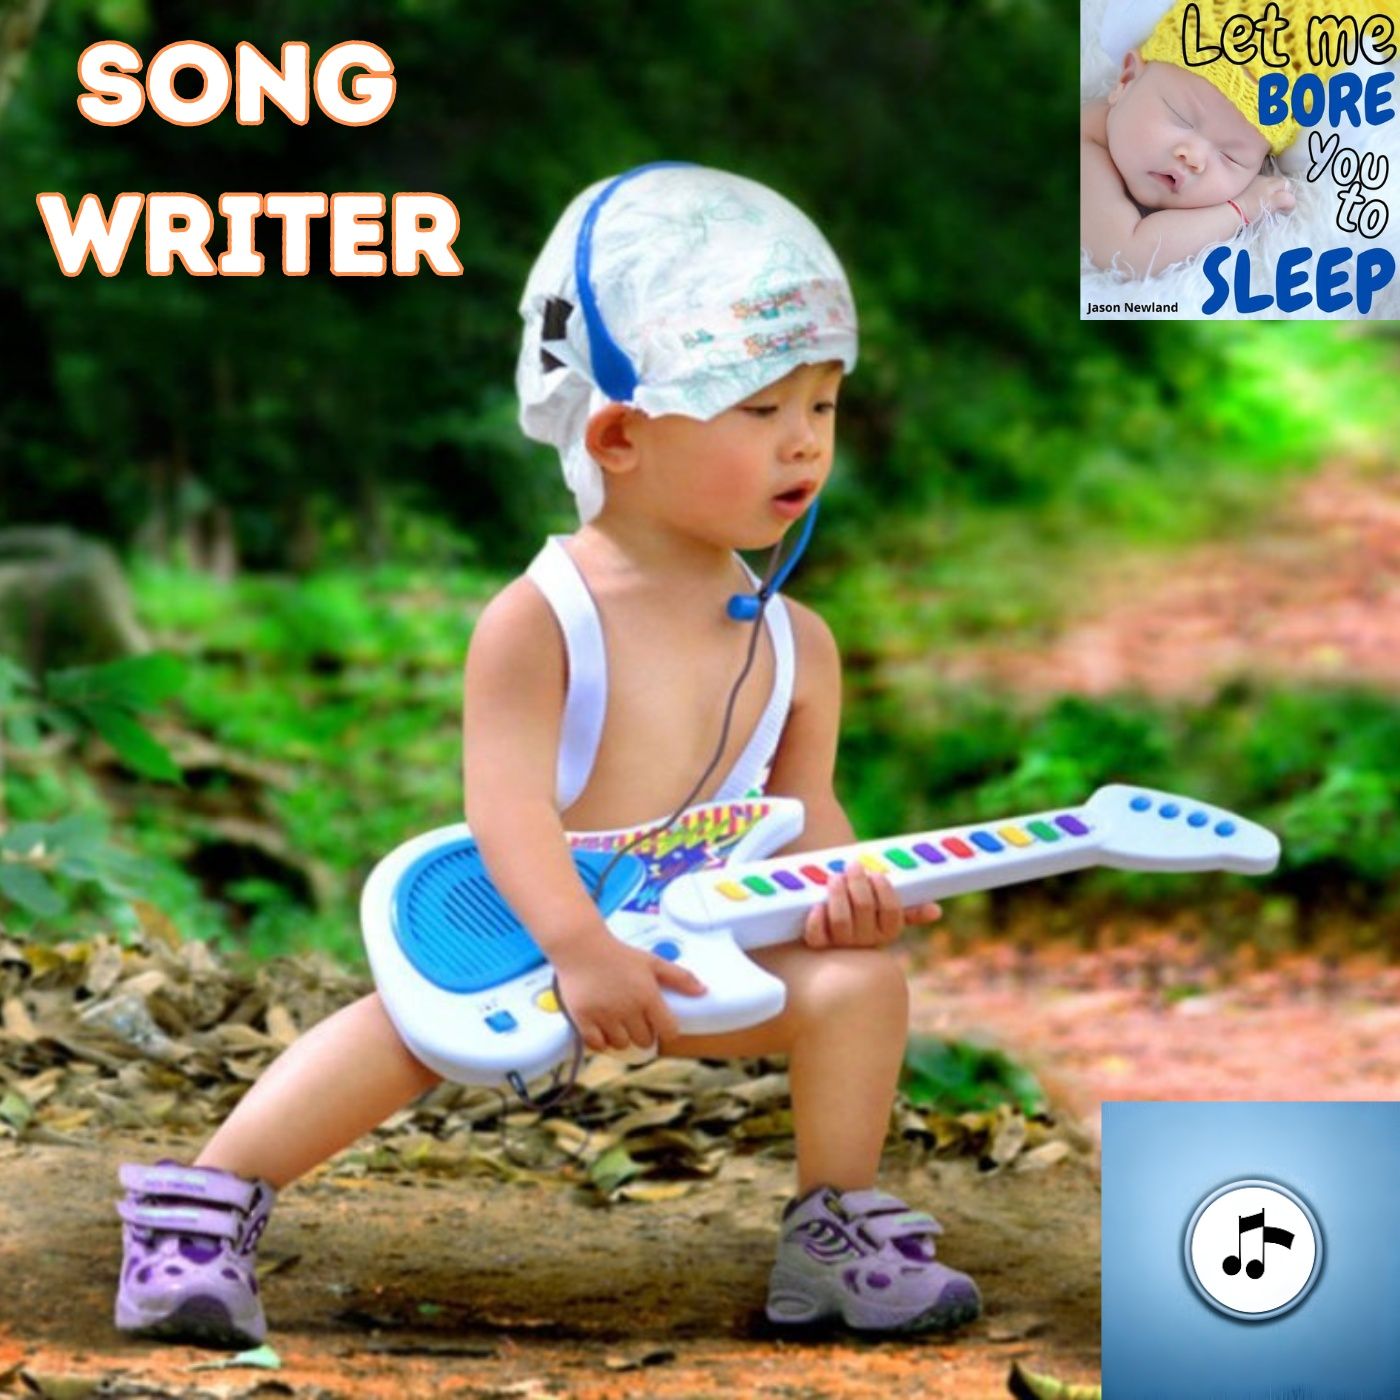 (music) #1048 - Song writer - Let me bore you to sleep